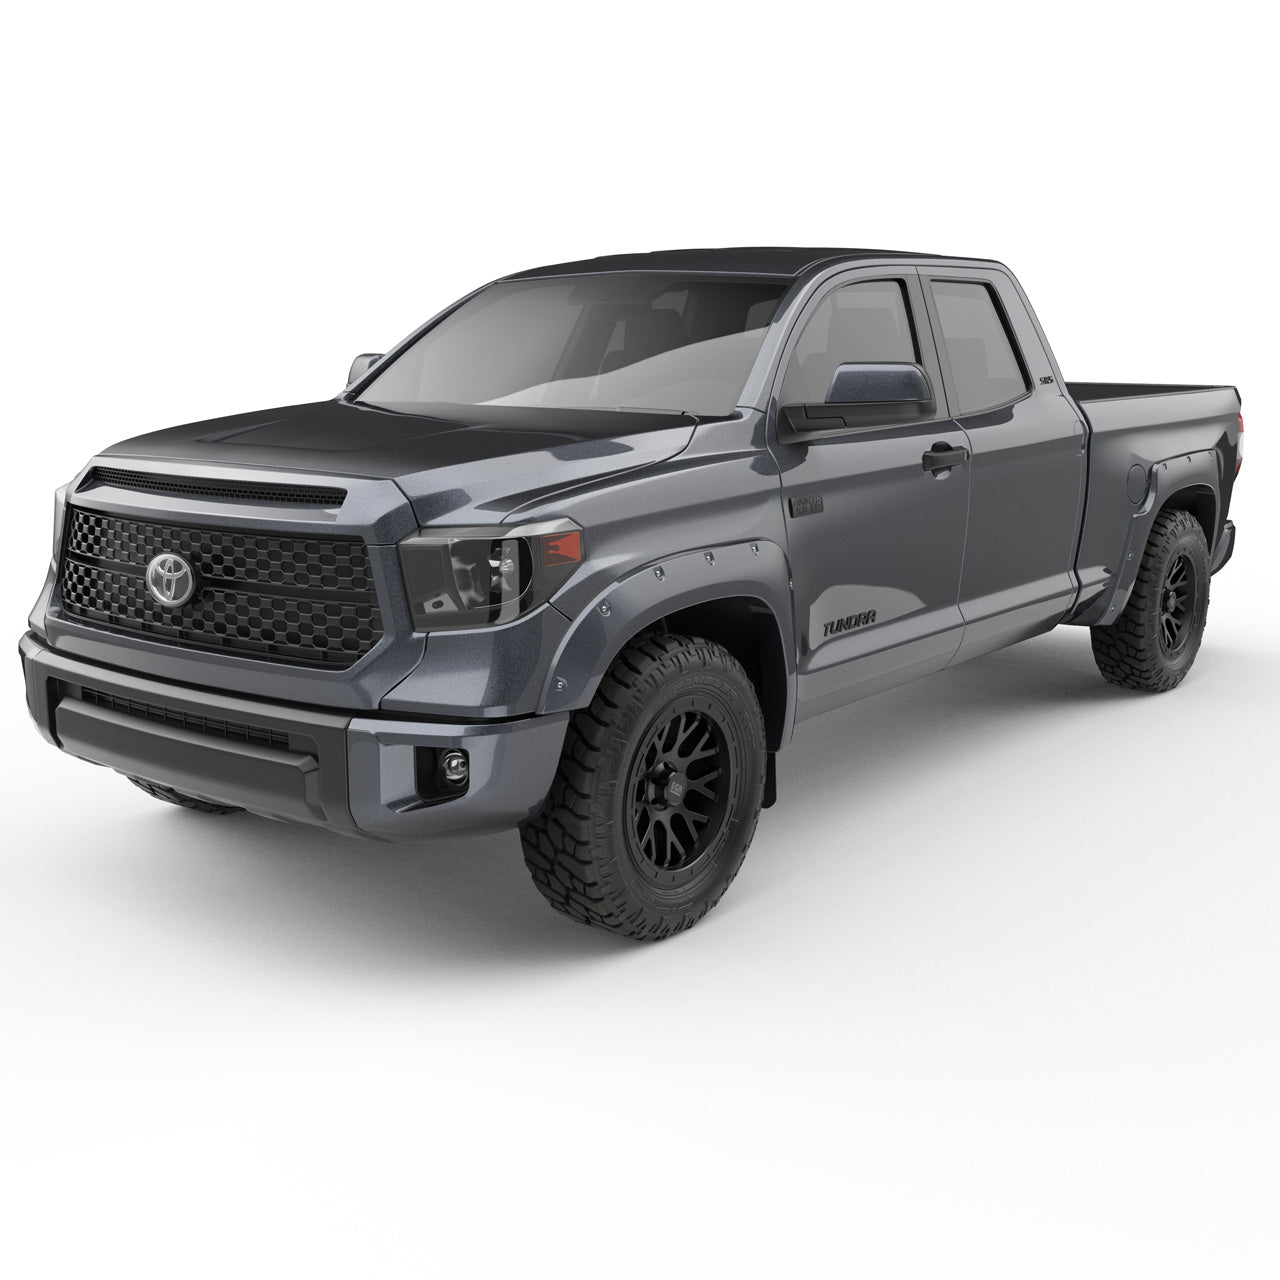 EGR Traditional Bolt-on look Fender Flares - 14-21 Toyota Tundra Painted to Code Magnetic Gray set of 4